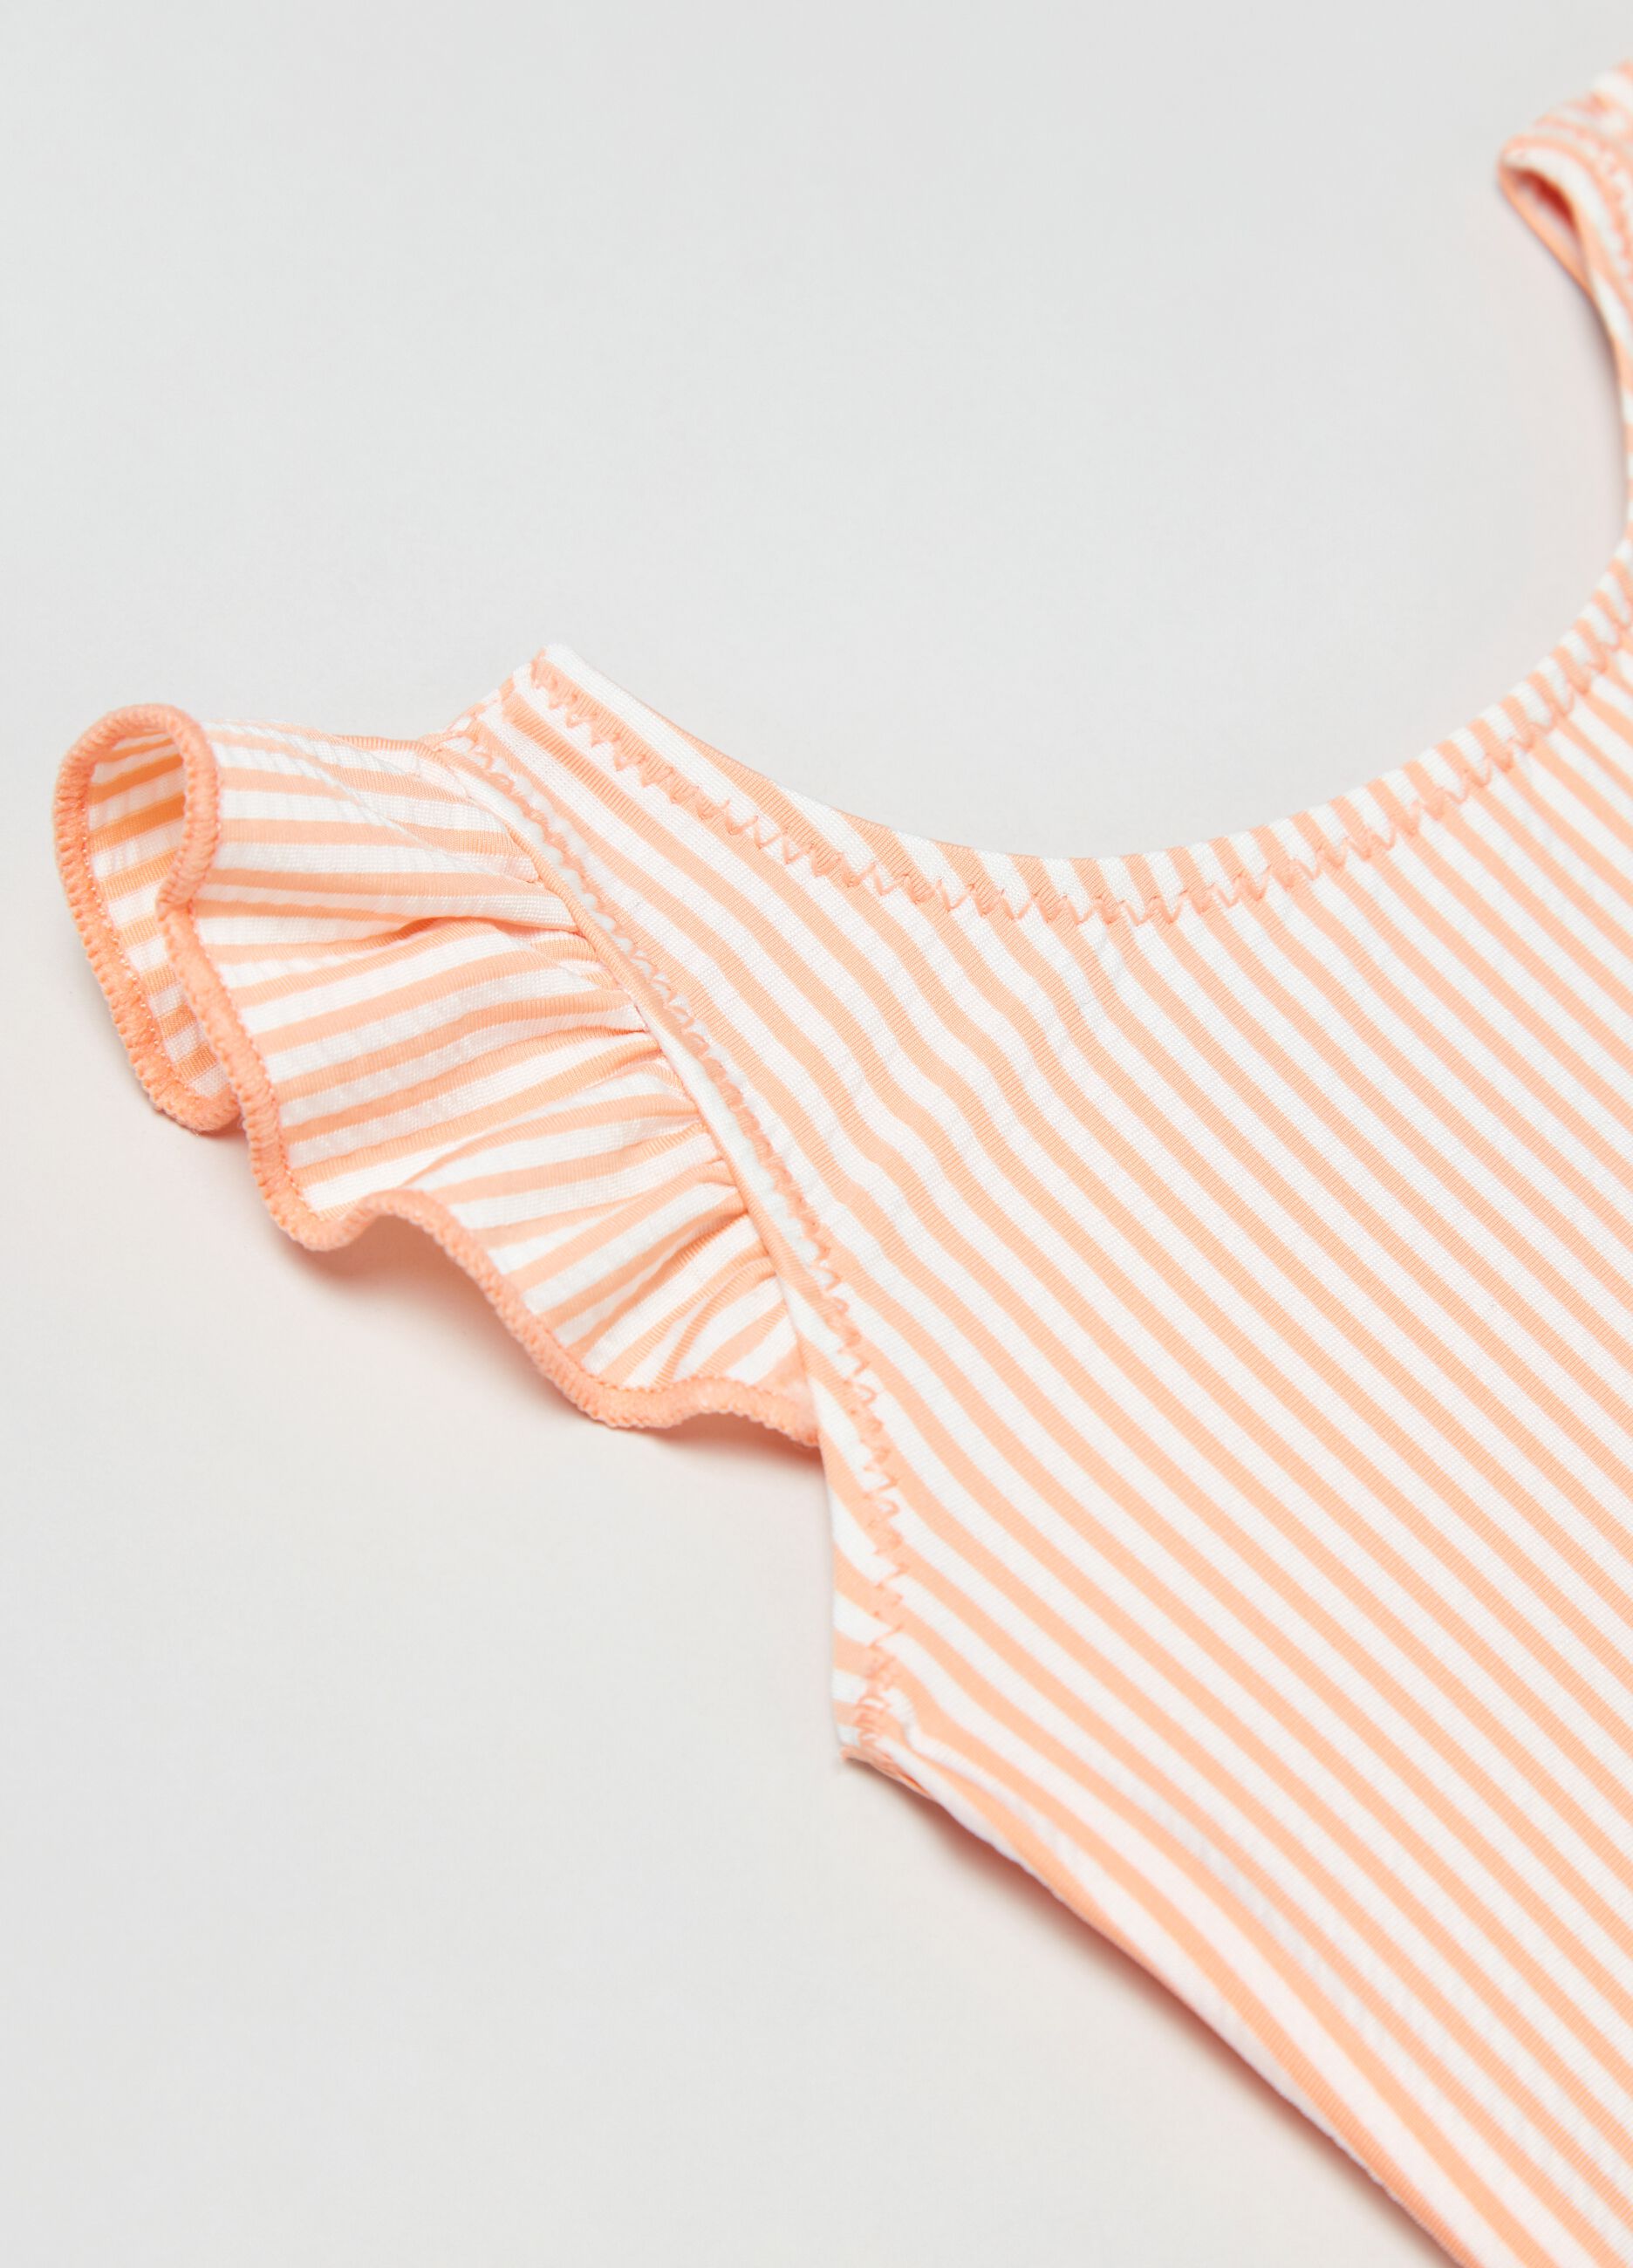 One-piece striped swimsuit